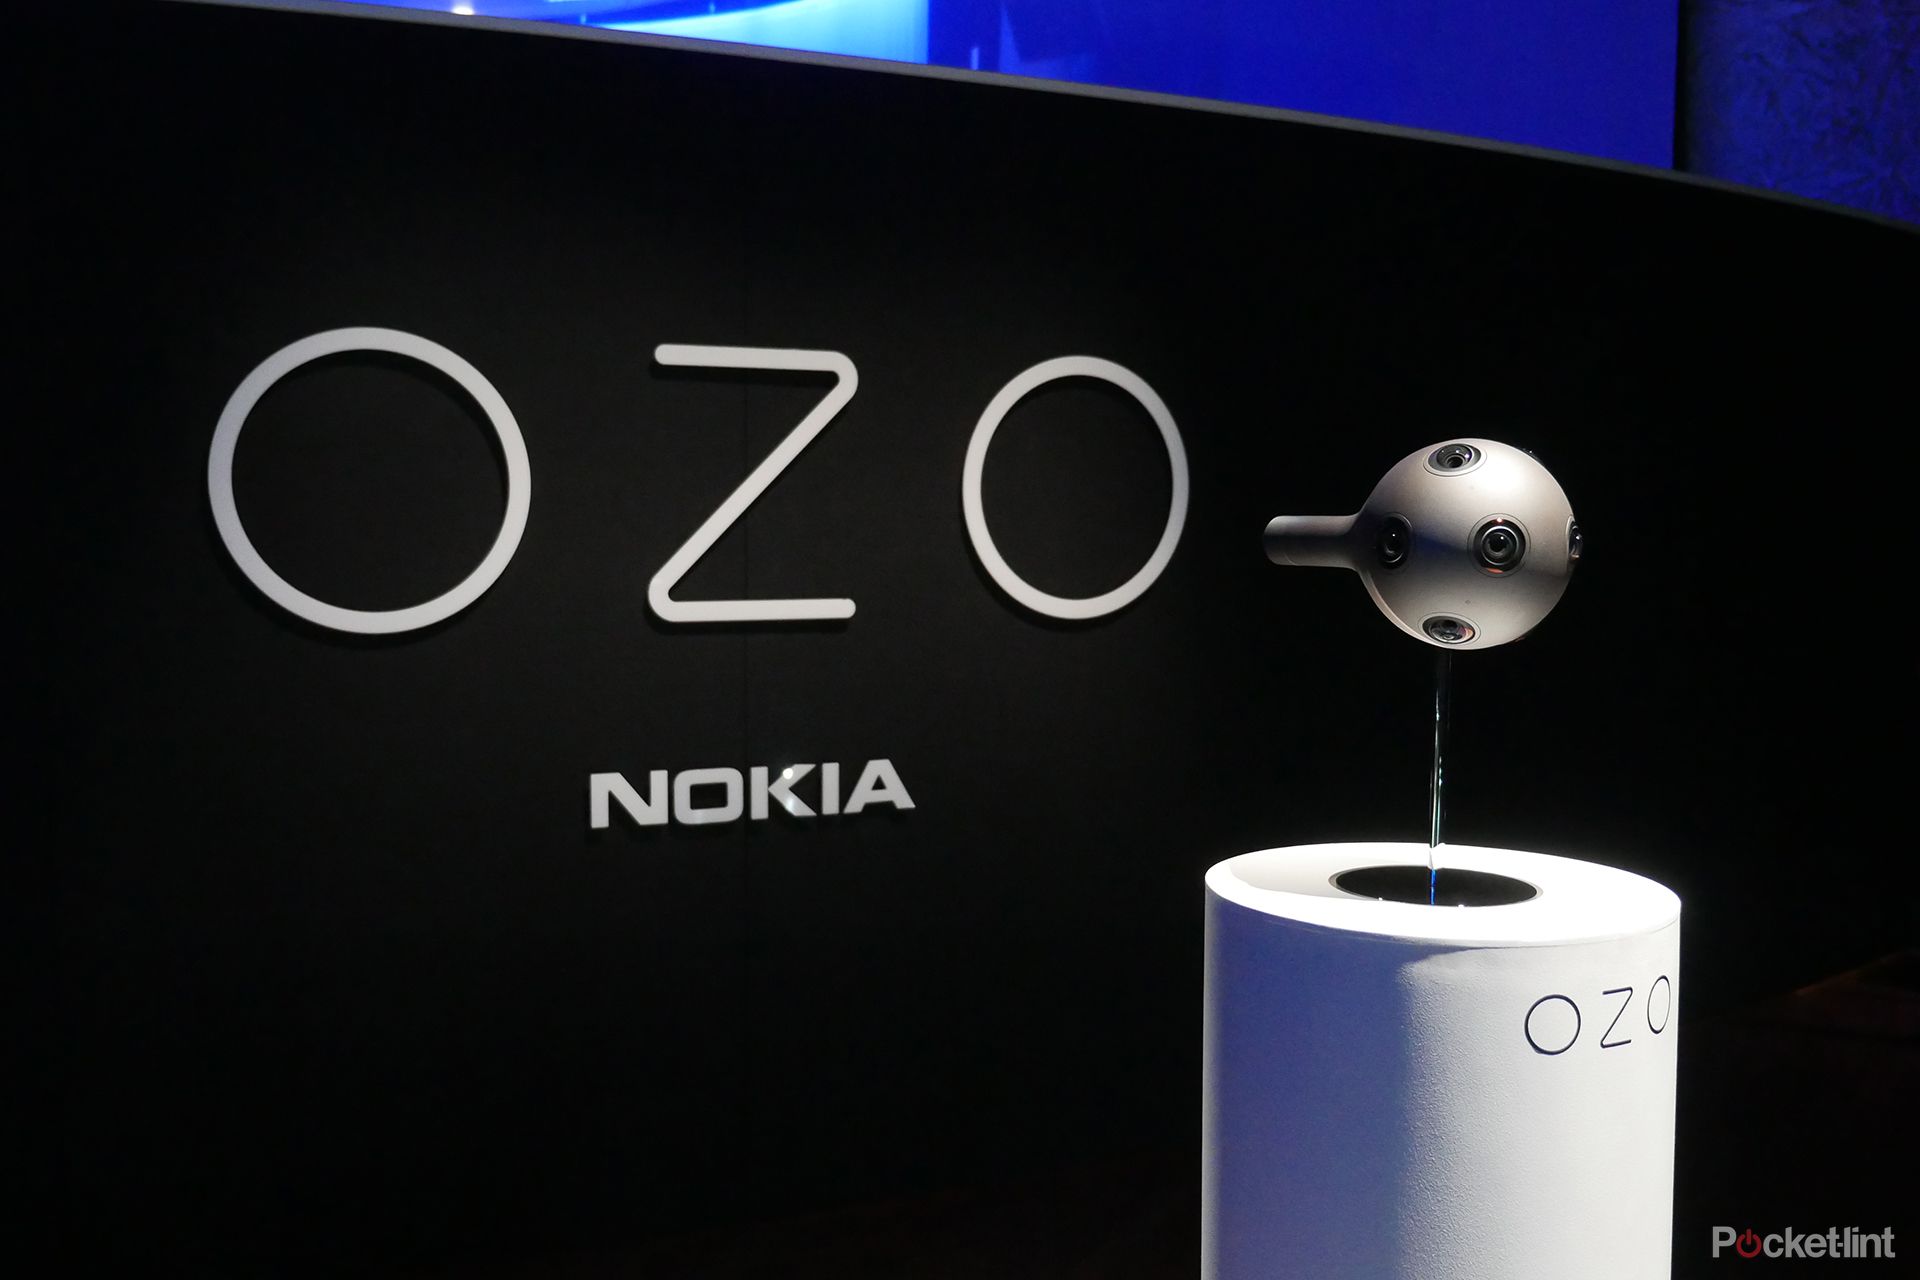 nokia ozo will cost 55 000 pro spec vr capture doesn t come cheap image 1